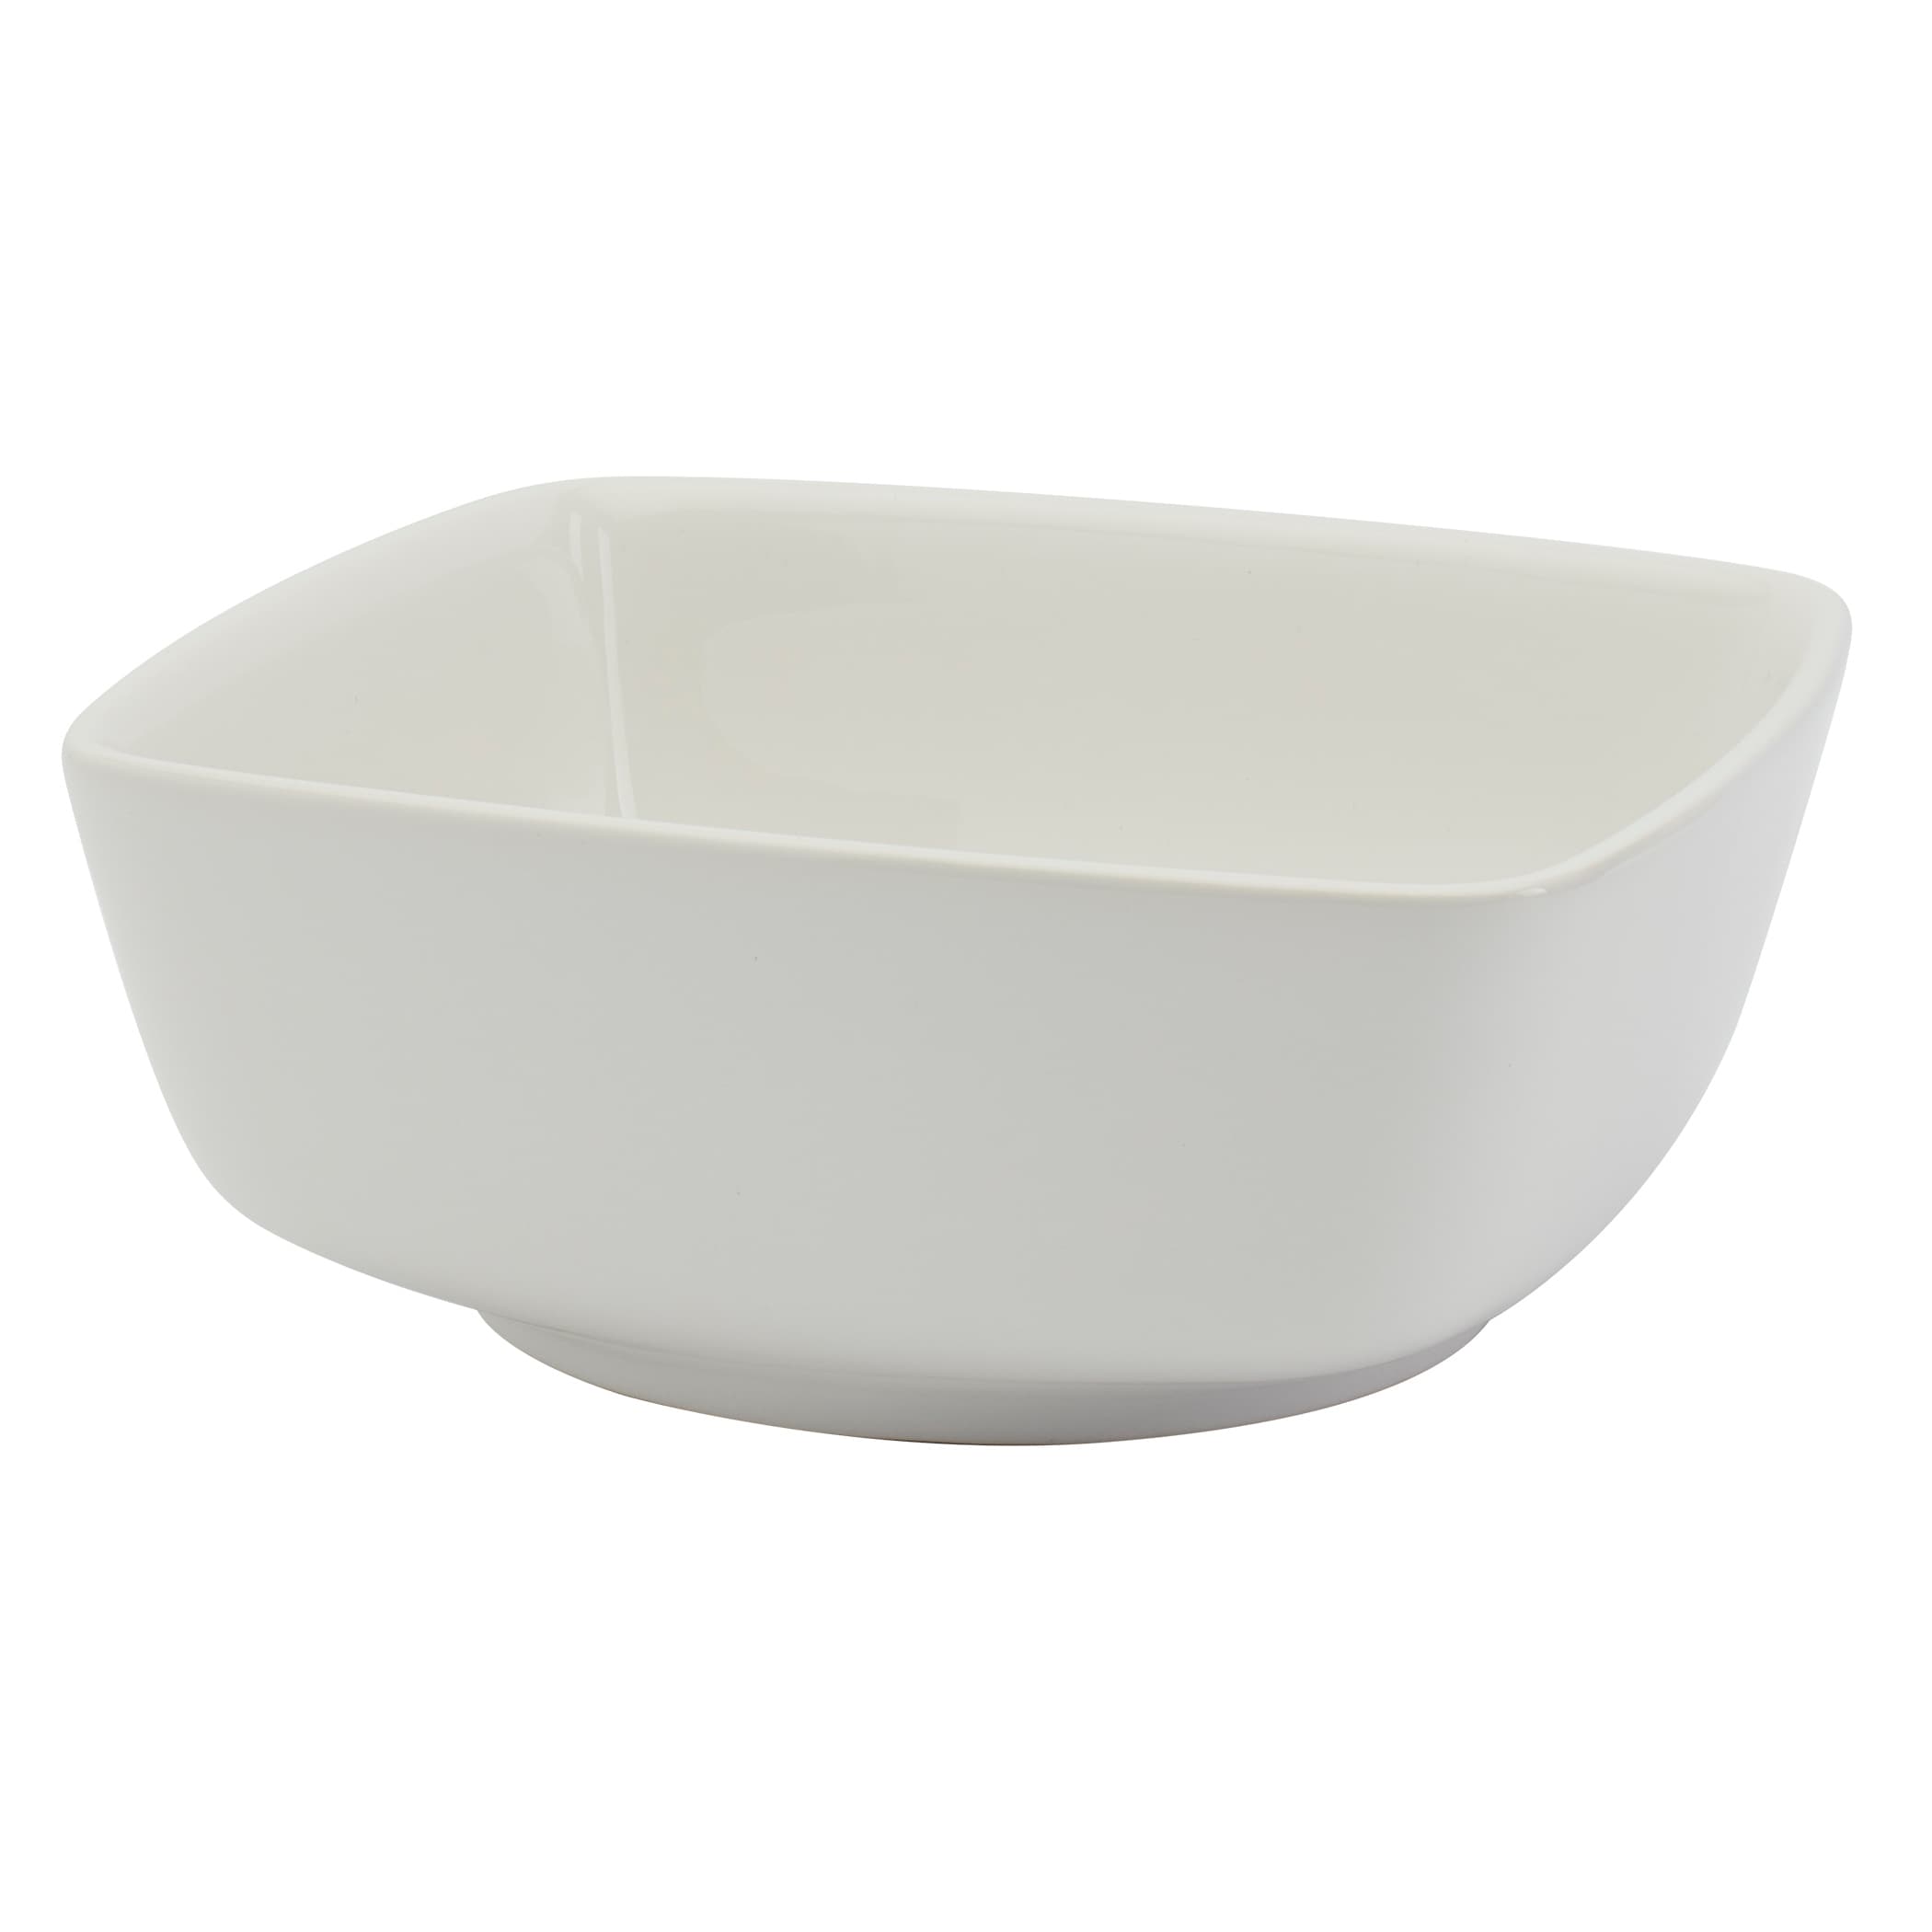 https://ak1.ostkcdn.com/images/products/is/images/direct/49ed4d875997779148a3faf3f9eade63b7c12b15/Denmark-Tools-for-Cooks-10%22-White-Ceramic-Square-Serving-Bowl.jpg